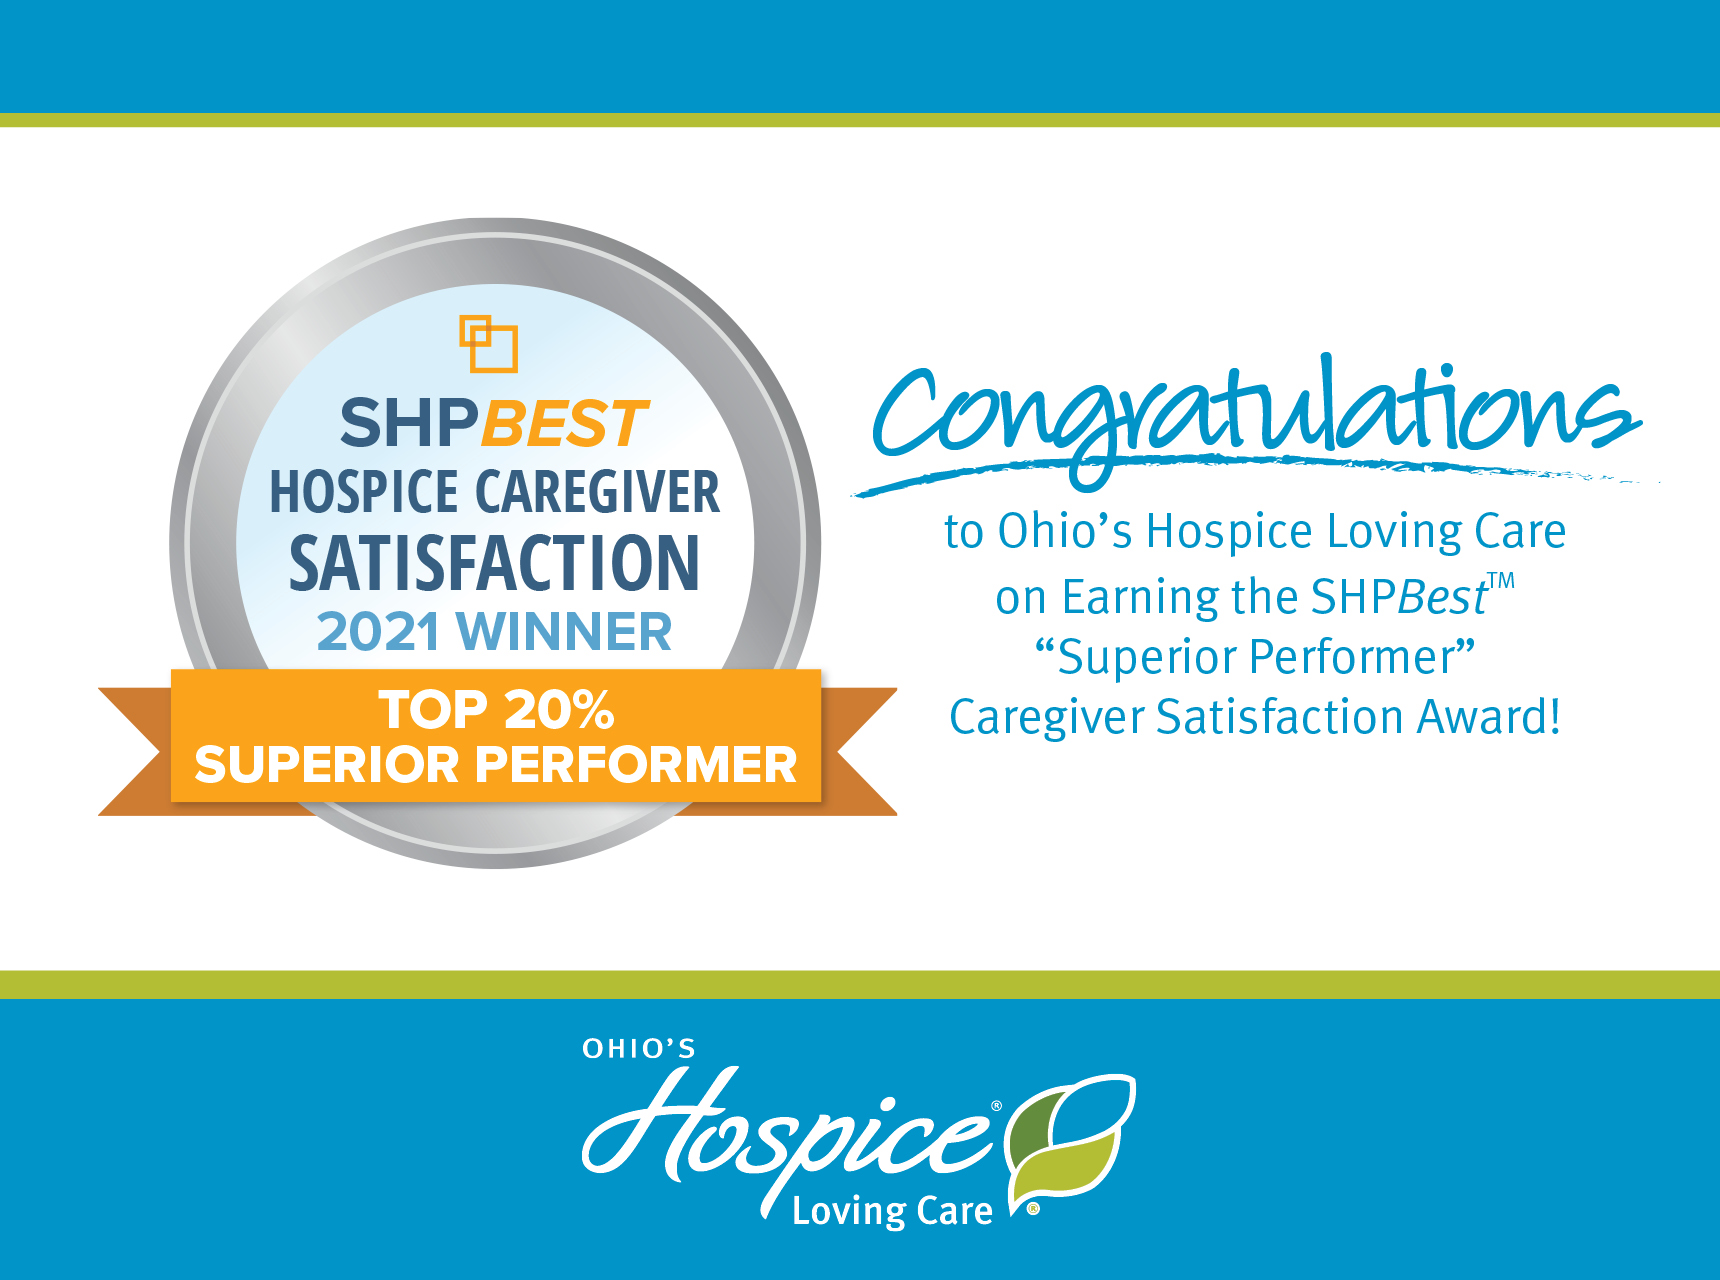 Congratulations to Ohio's Hospice Loving Care on Earning SHPBest "Superior Performer" Caregiver Satisfaction Award!